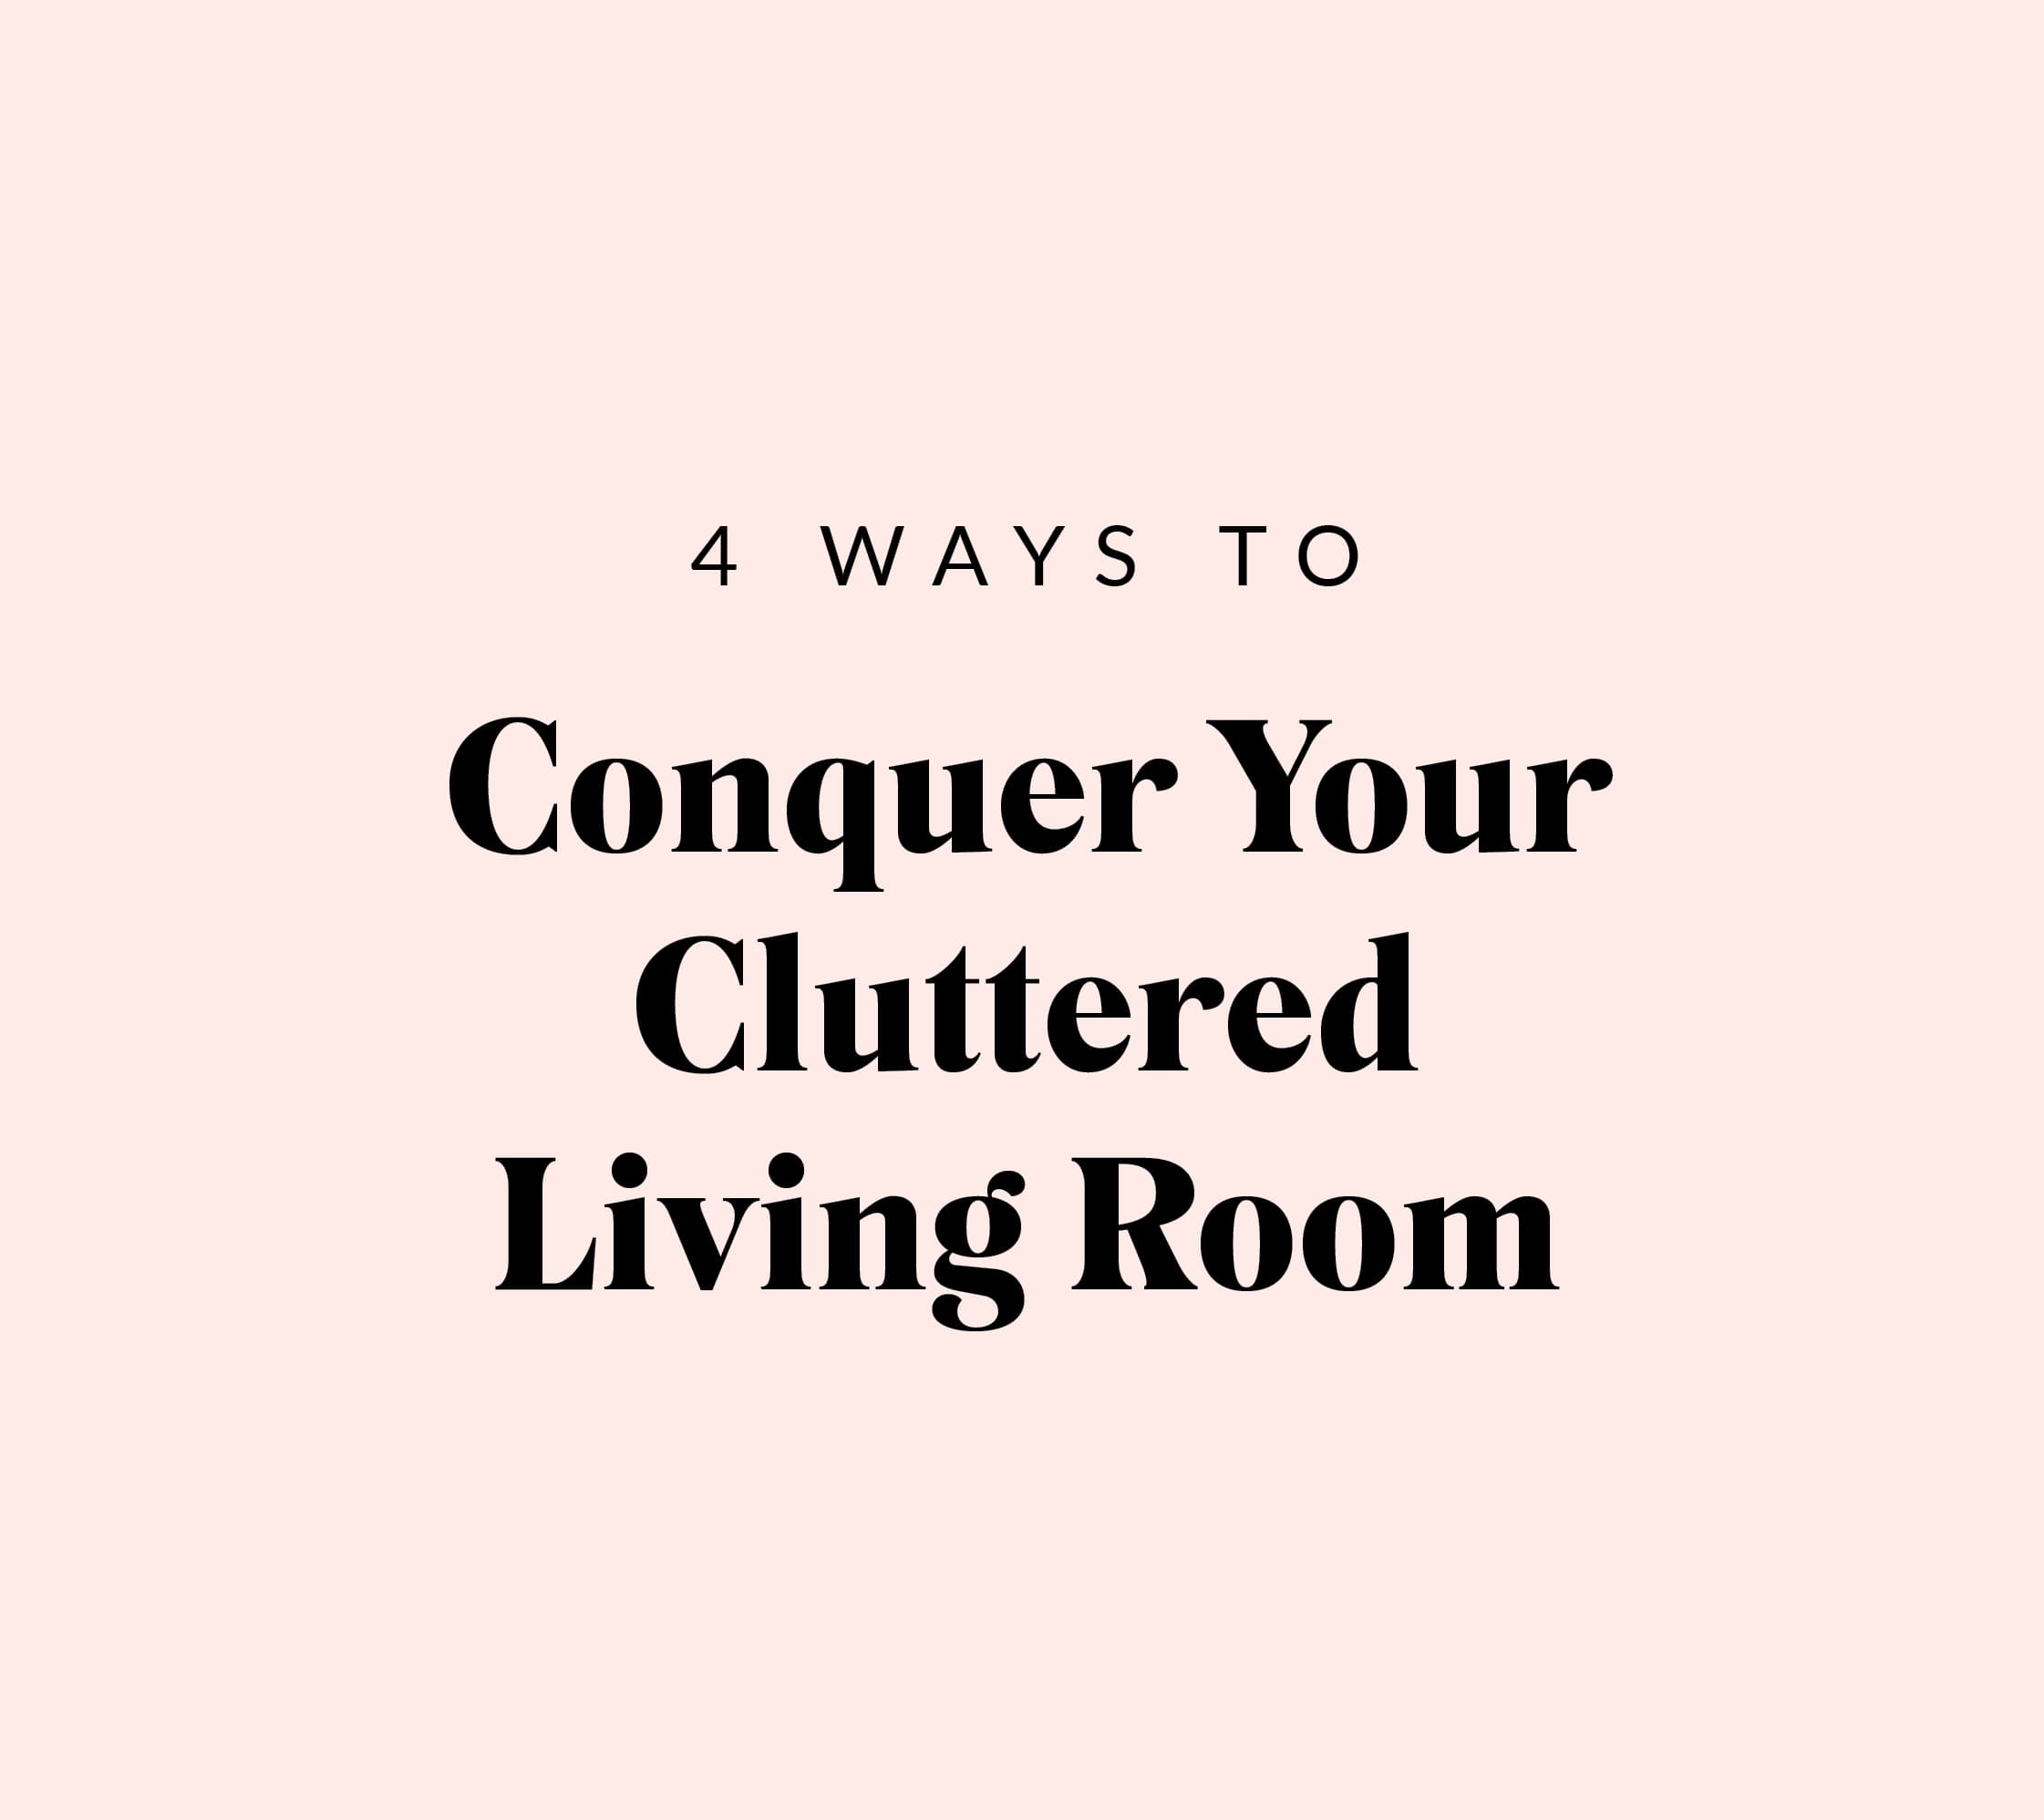 Conquer Your Cluttered Living Room - pink box